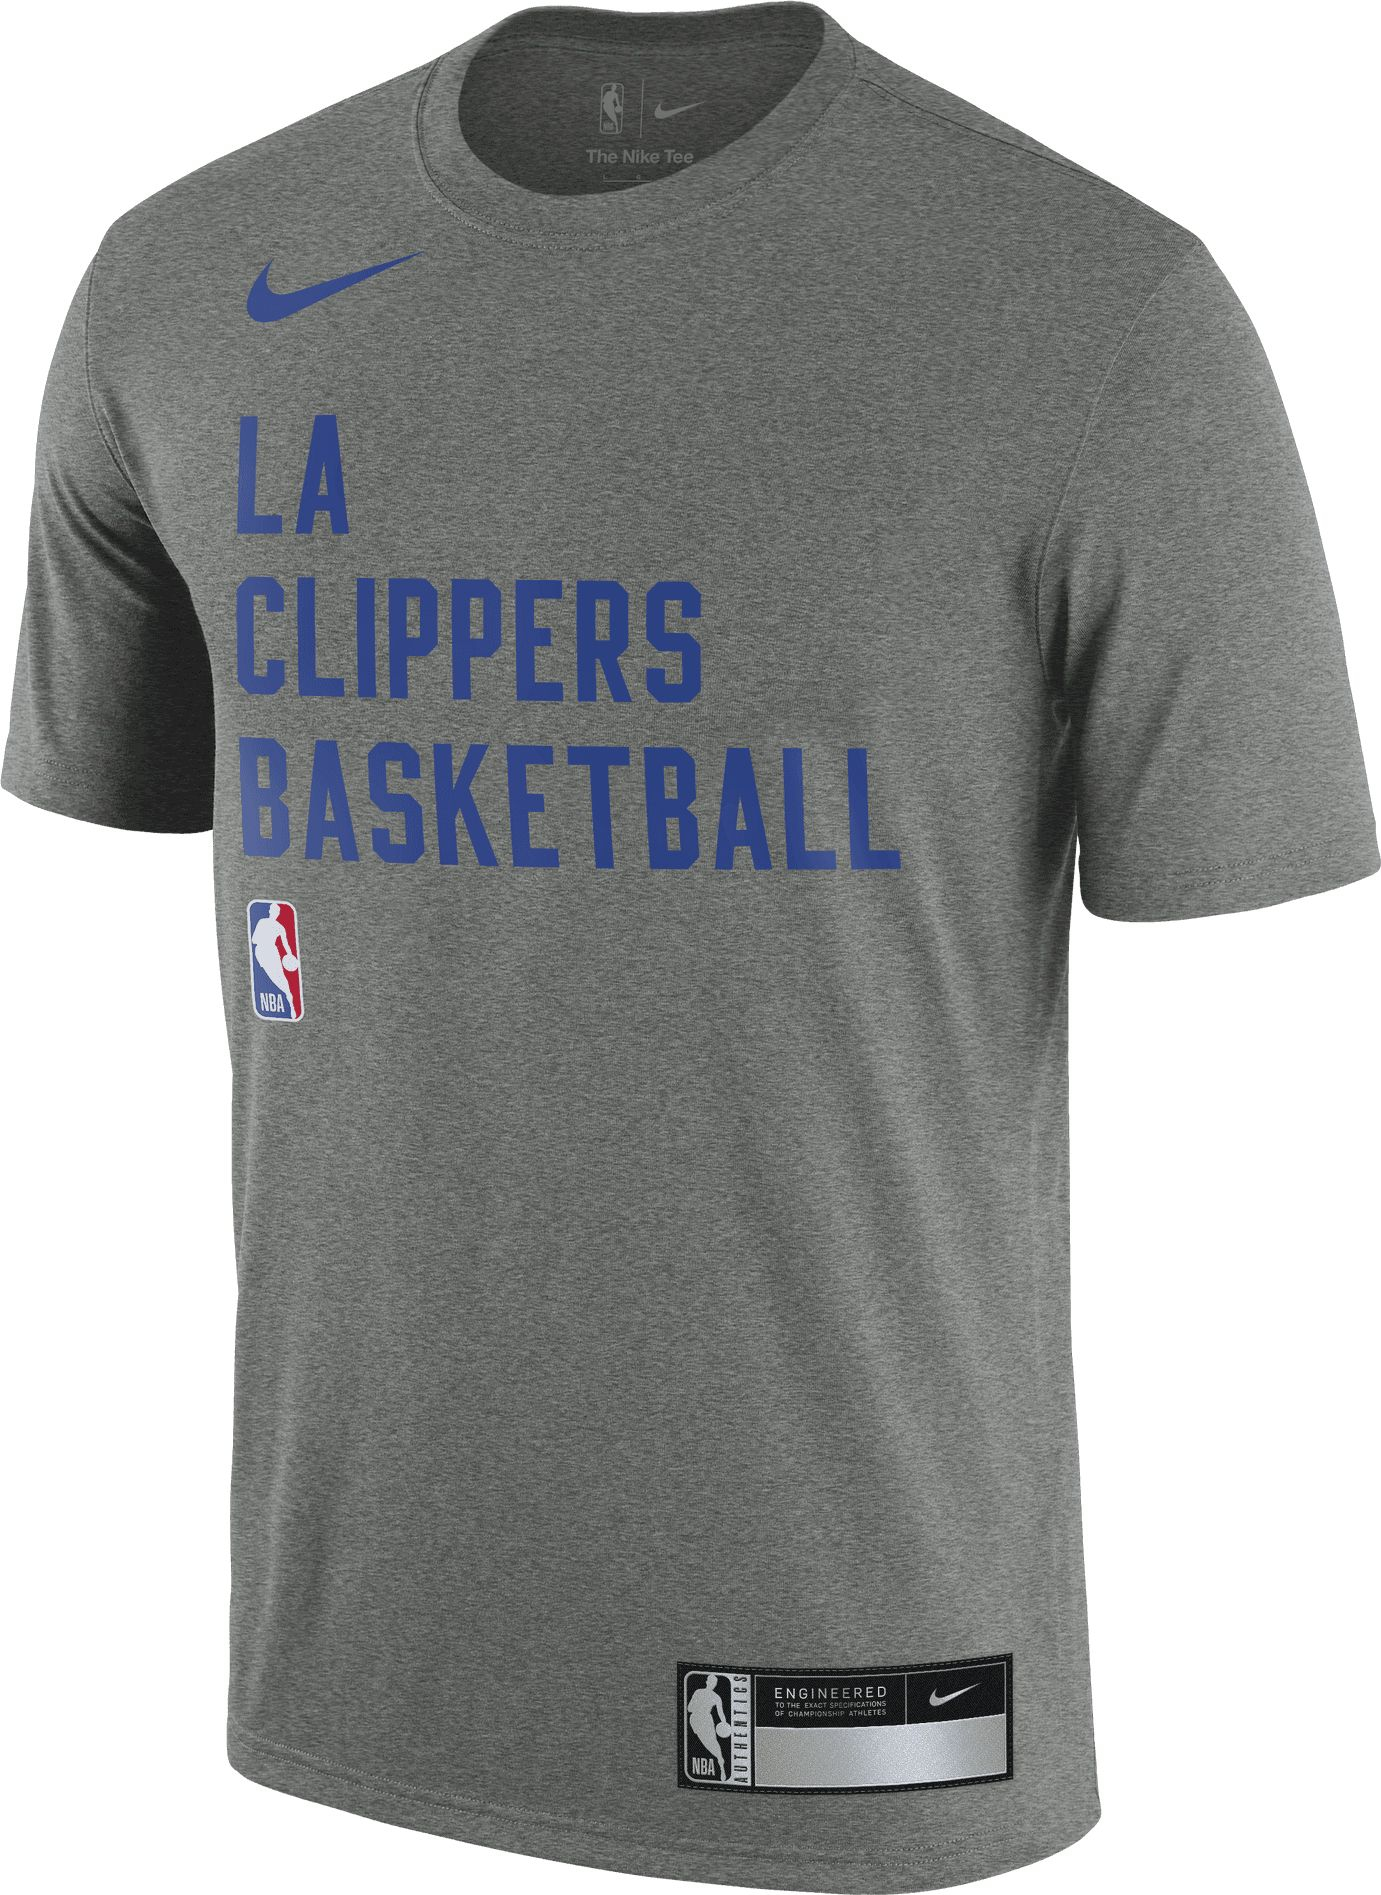 Nike Men's Los Angeles Clippers Grey Practice T-Shirt, XXL, Gray